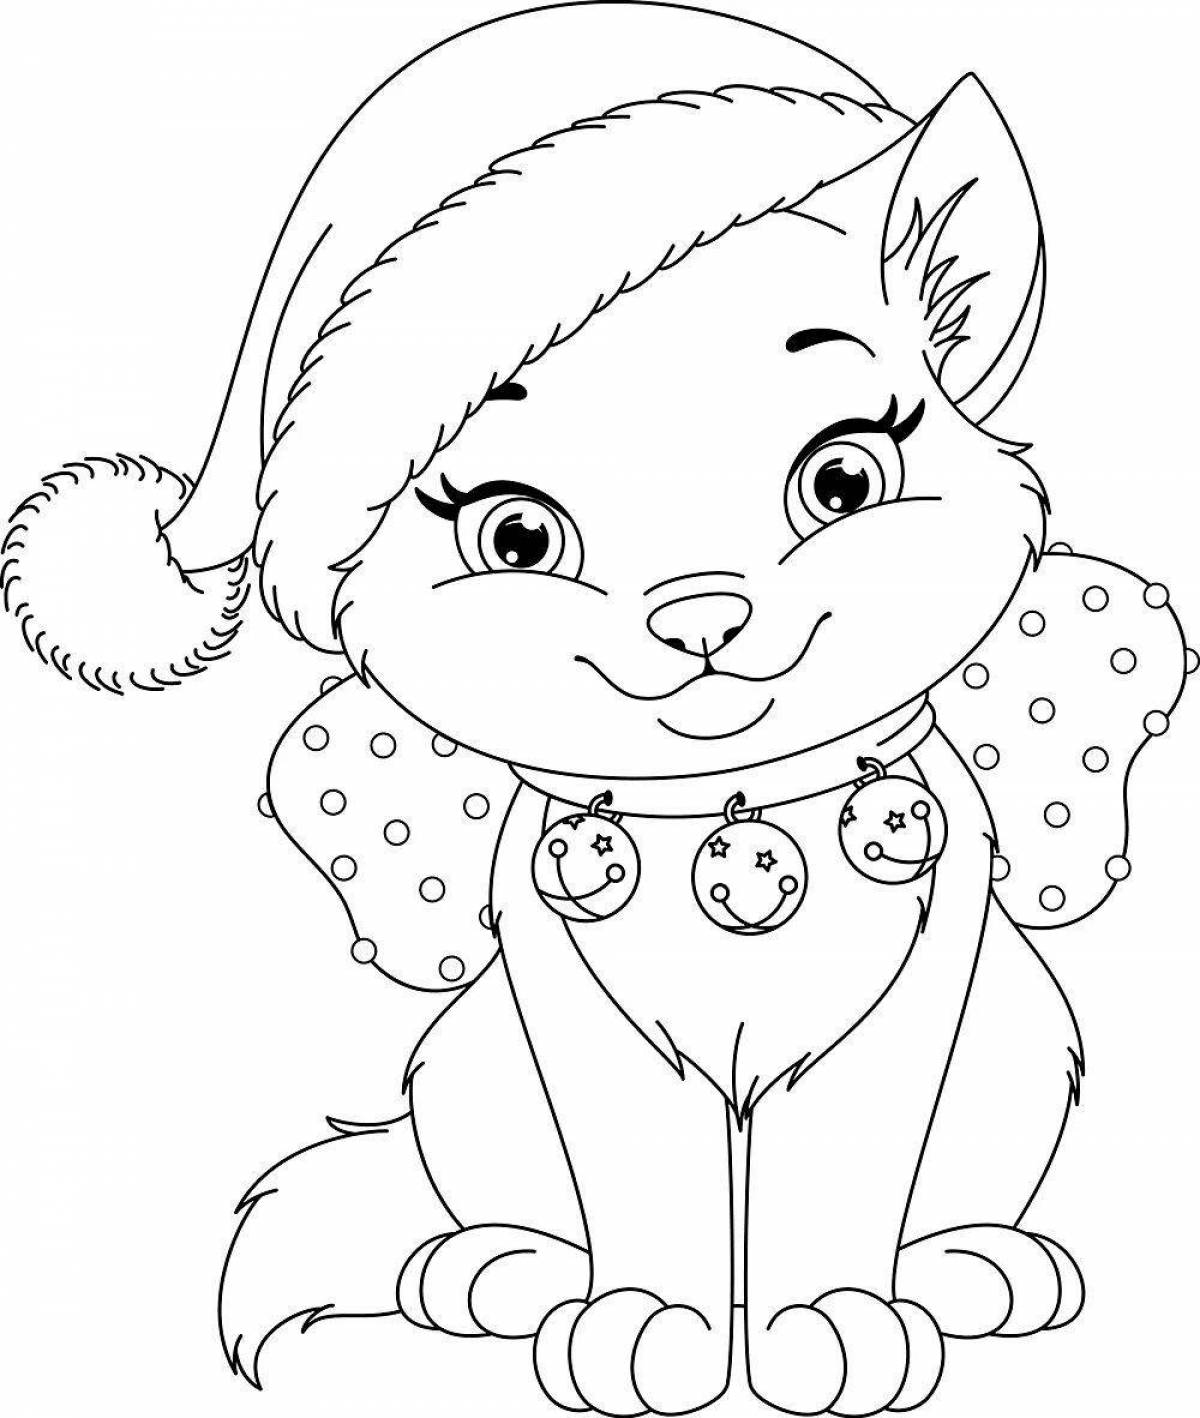 Charming cat in a hat coloring book